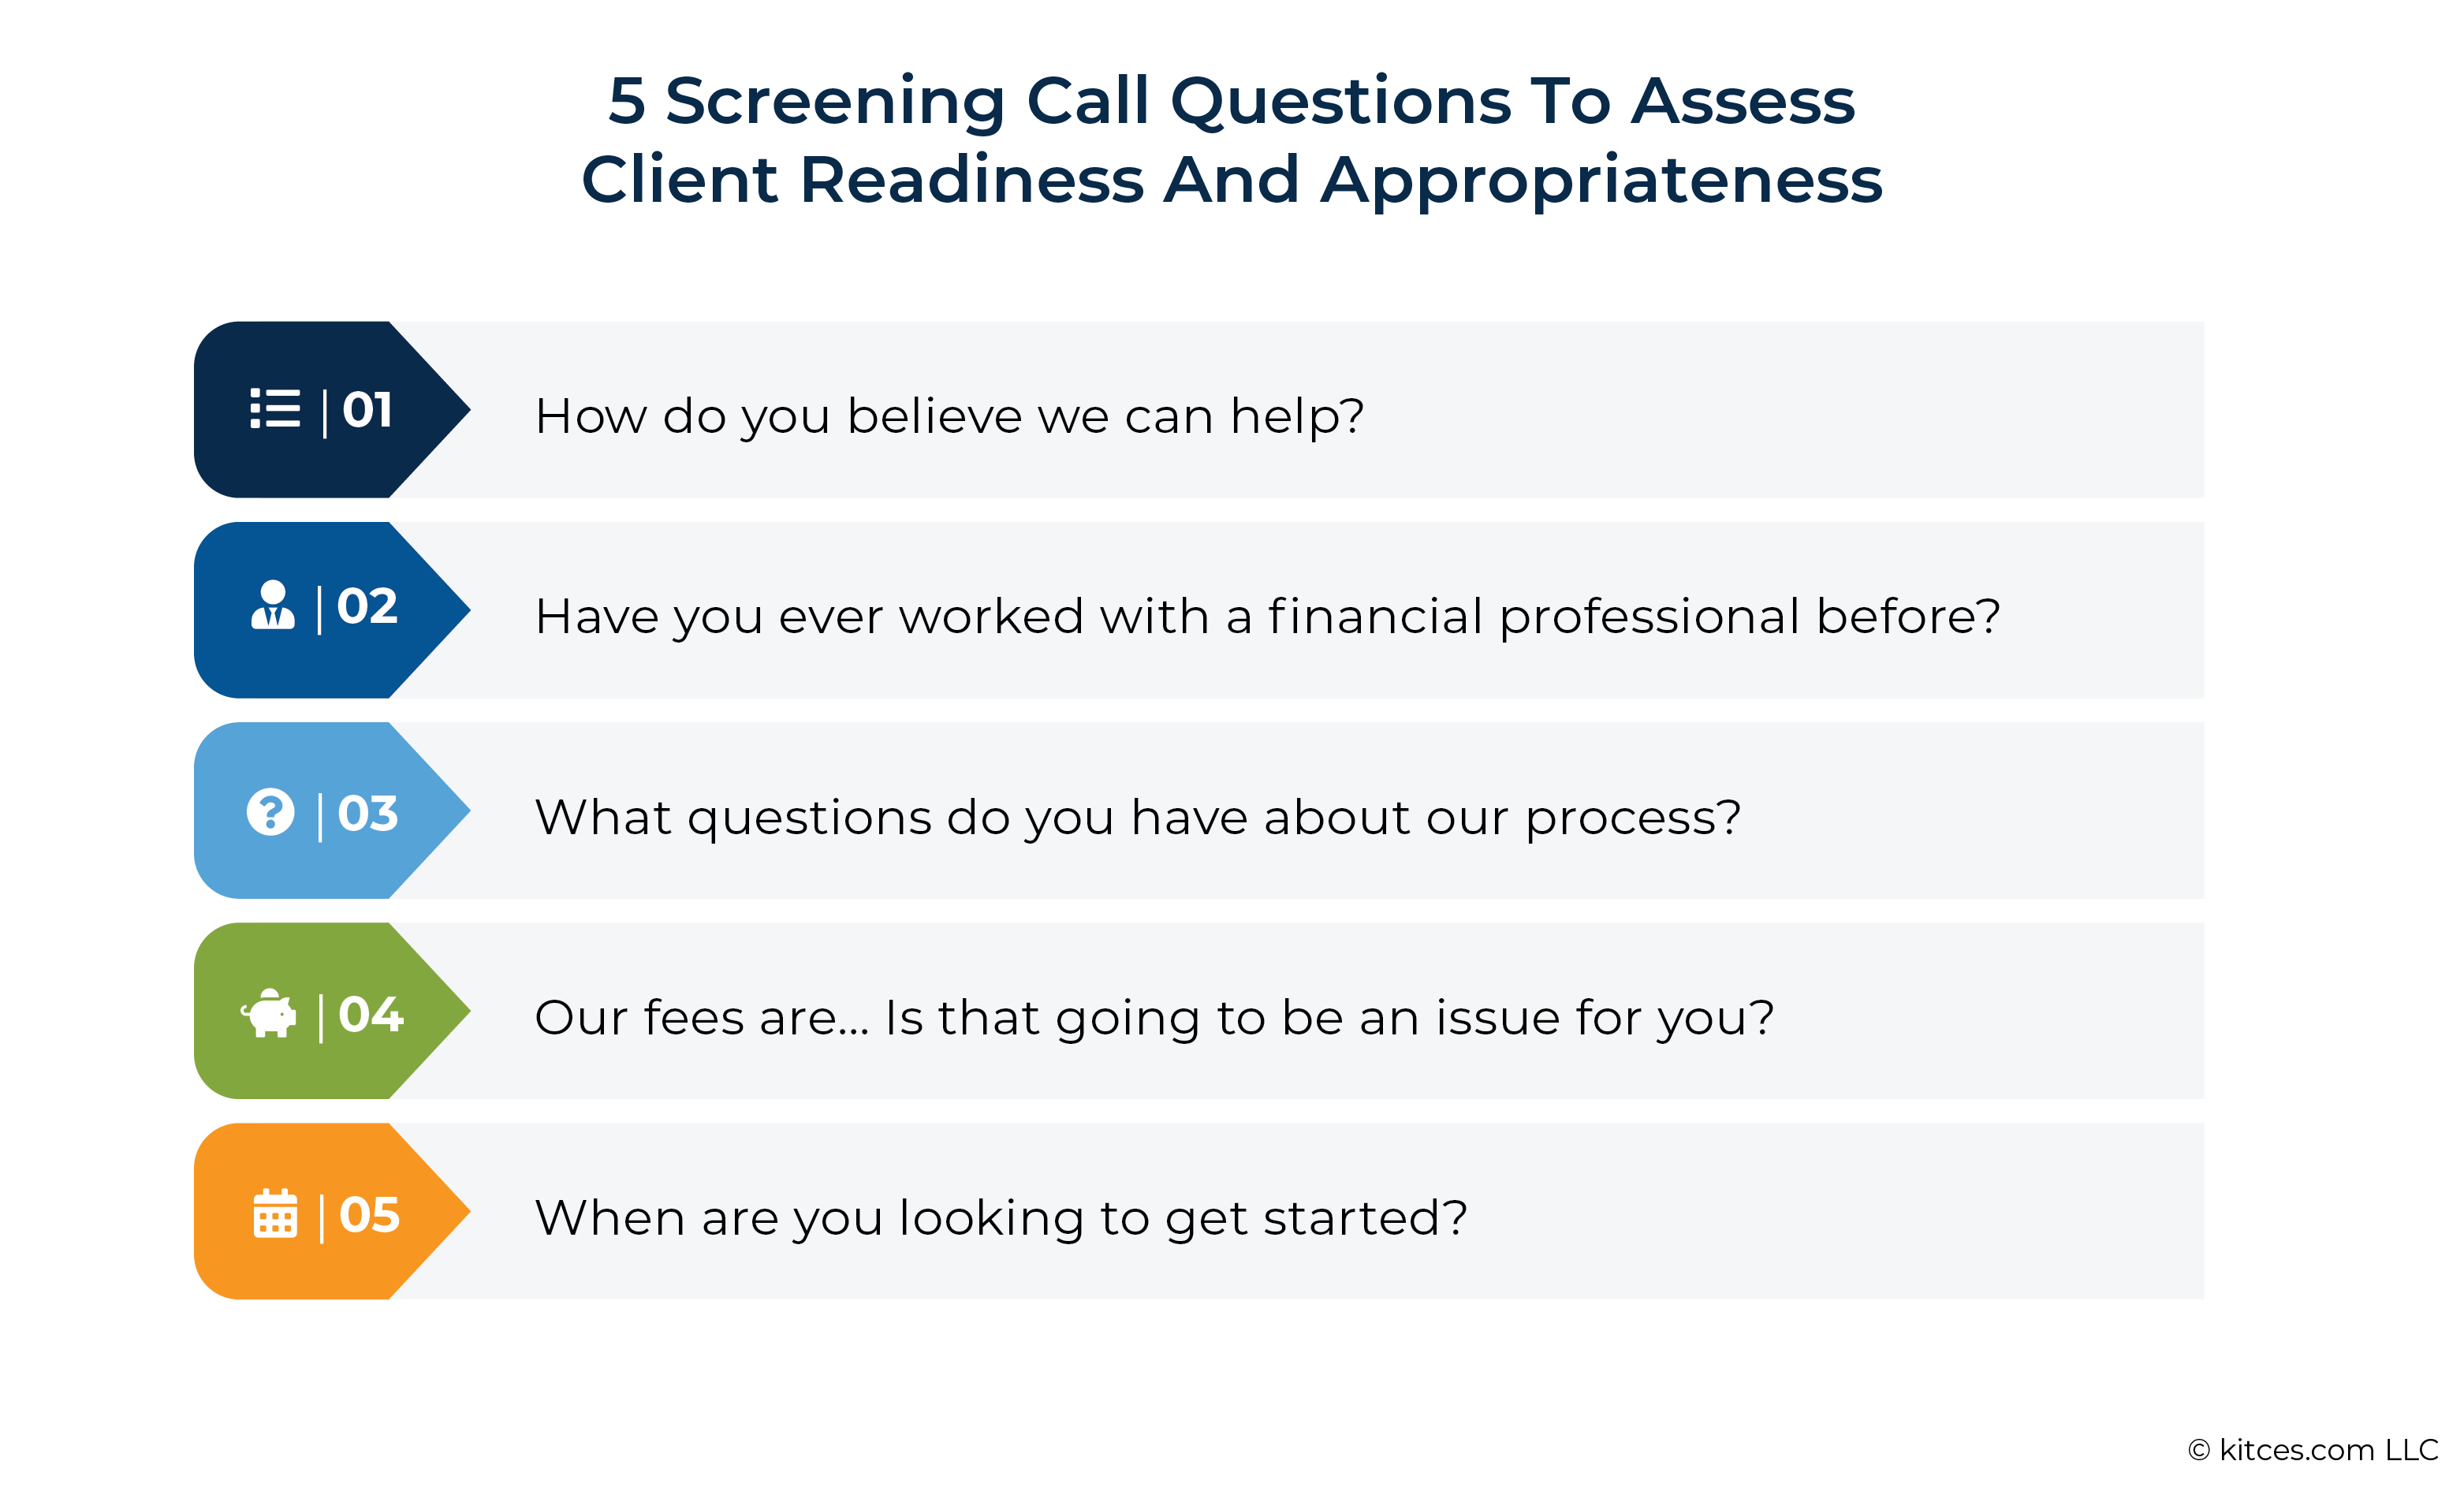 Screening Call Questions To Assess Client Readiness And Appropriateness